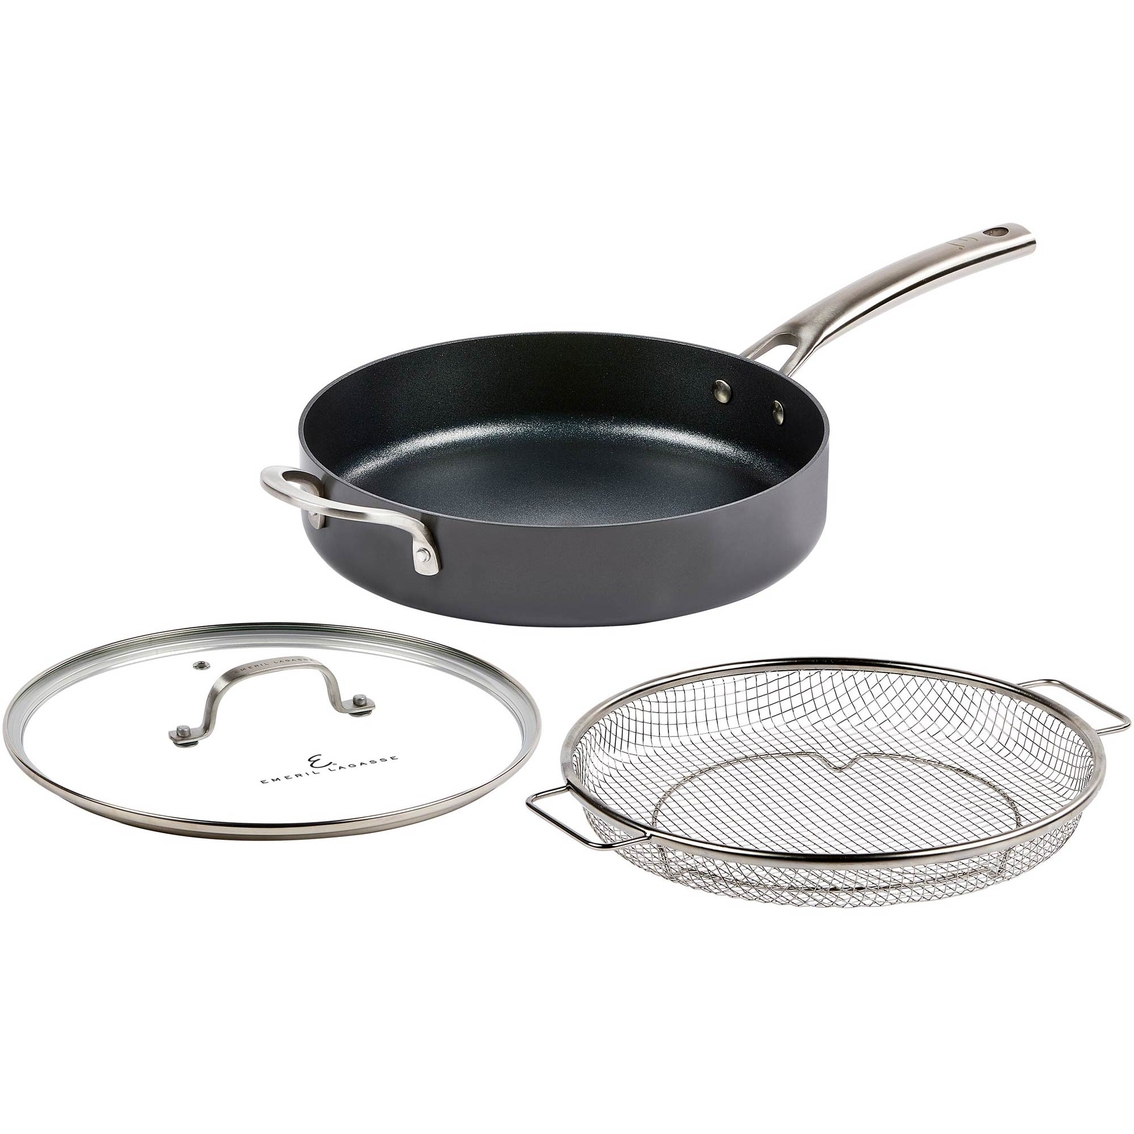 Emeril Forever Pro 11 In. Covered Chicken Fry Pan